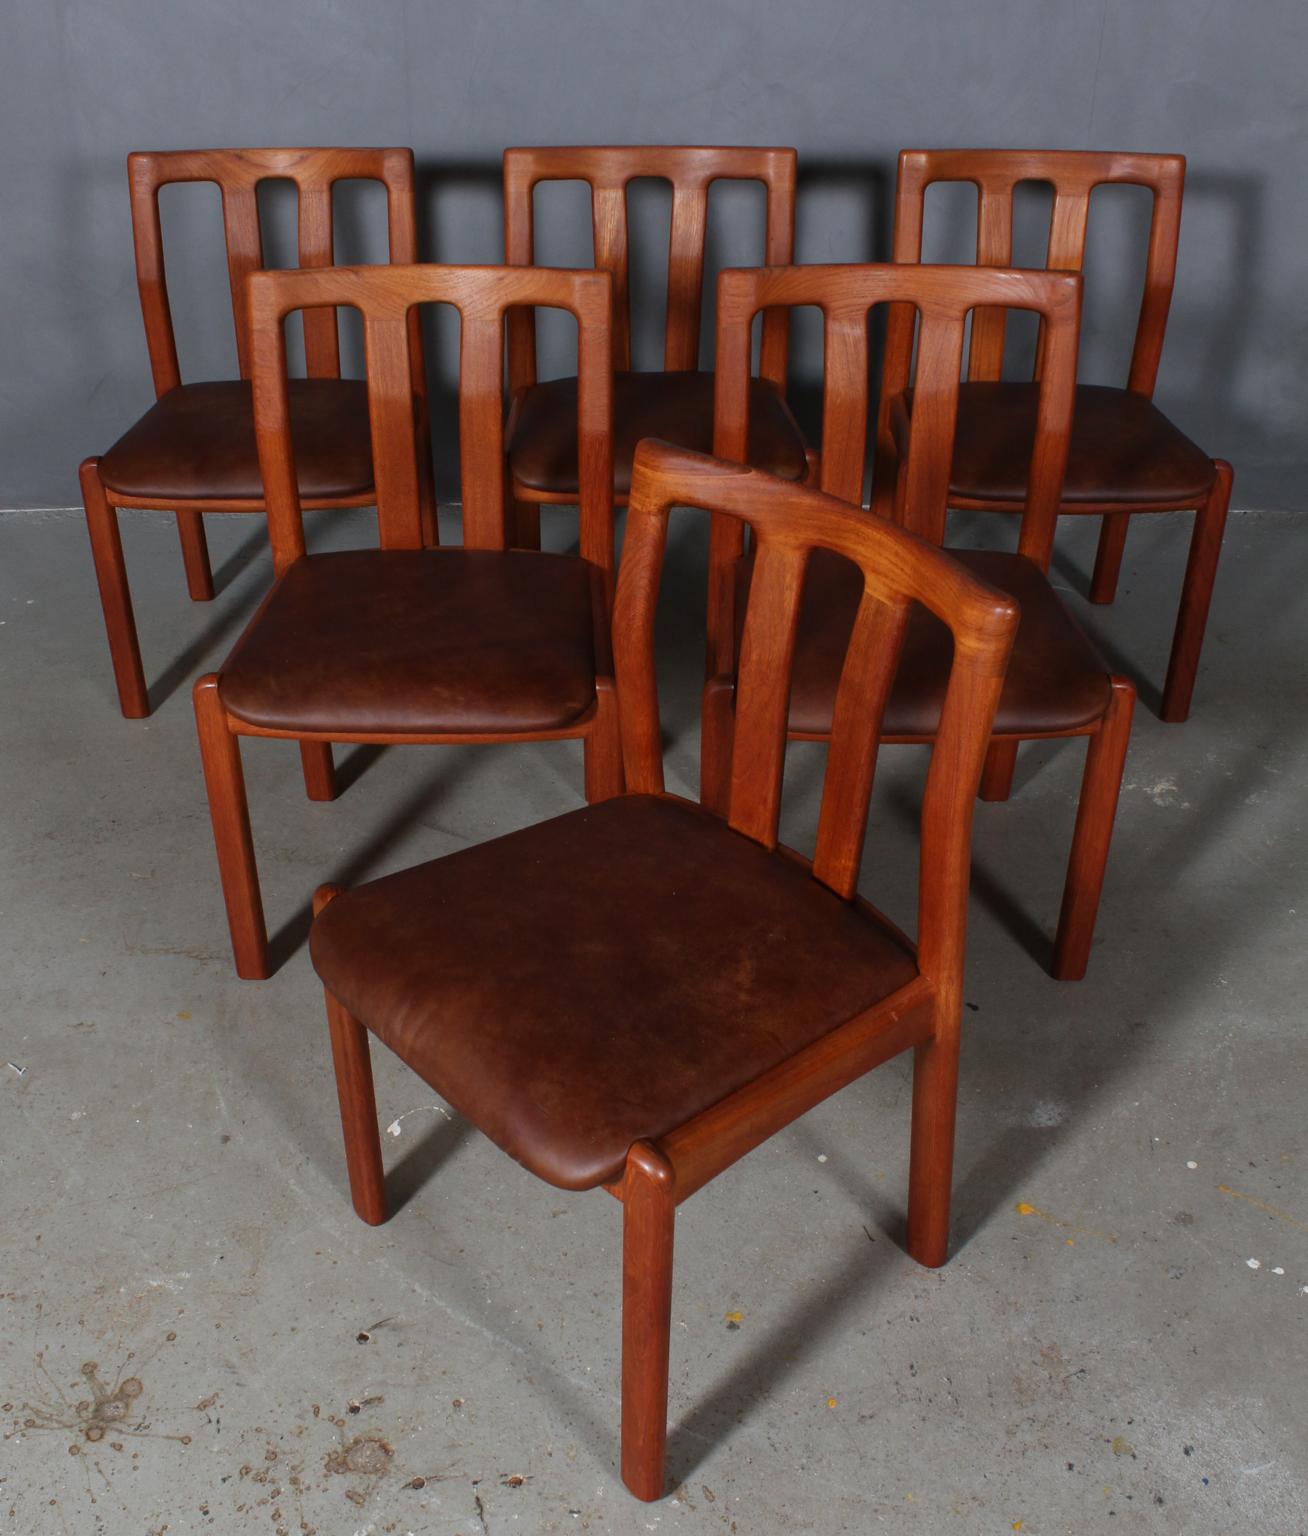 Dyrlund set of six dining chairs in teak.

New upholstered with range vintage aniline leather.

Made by Dyrlund in the 1960s.